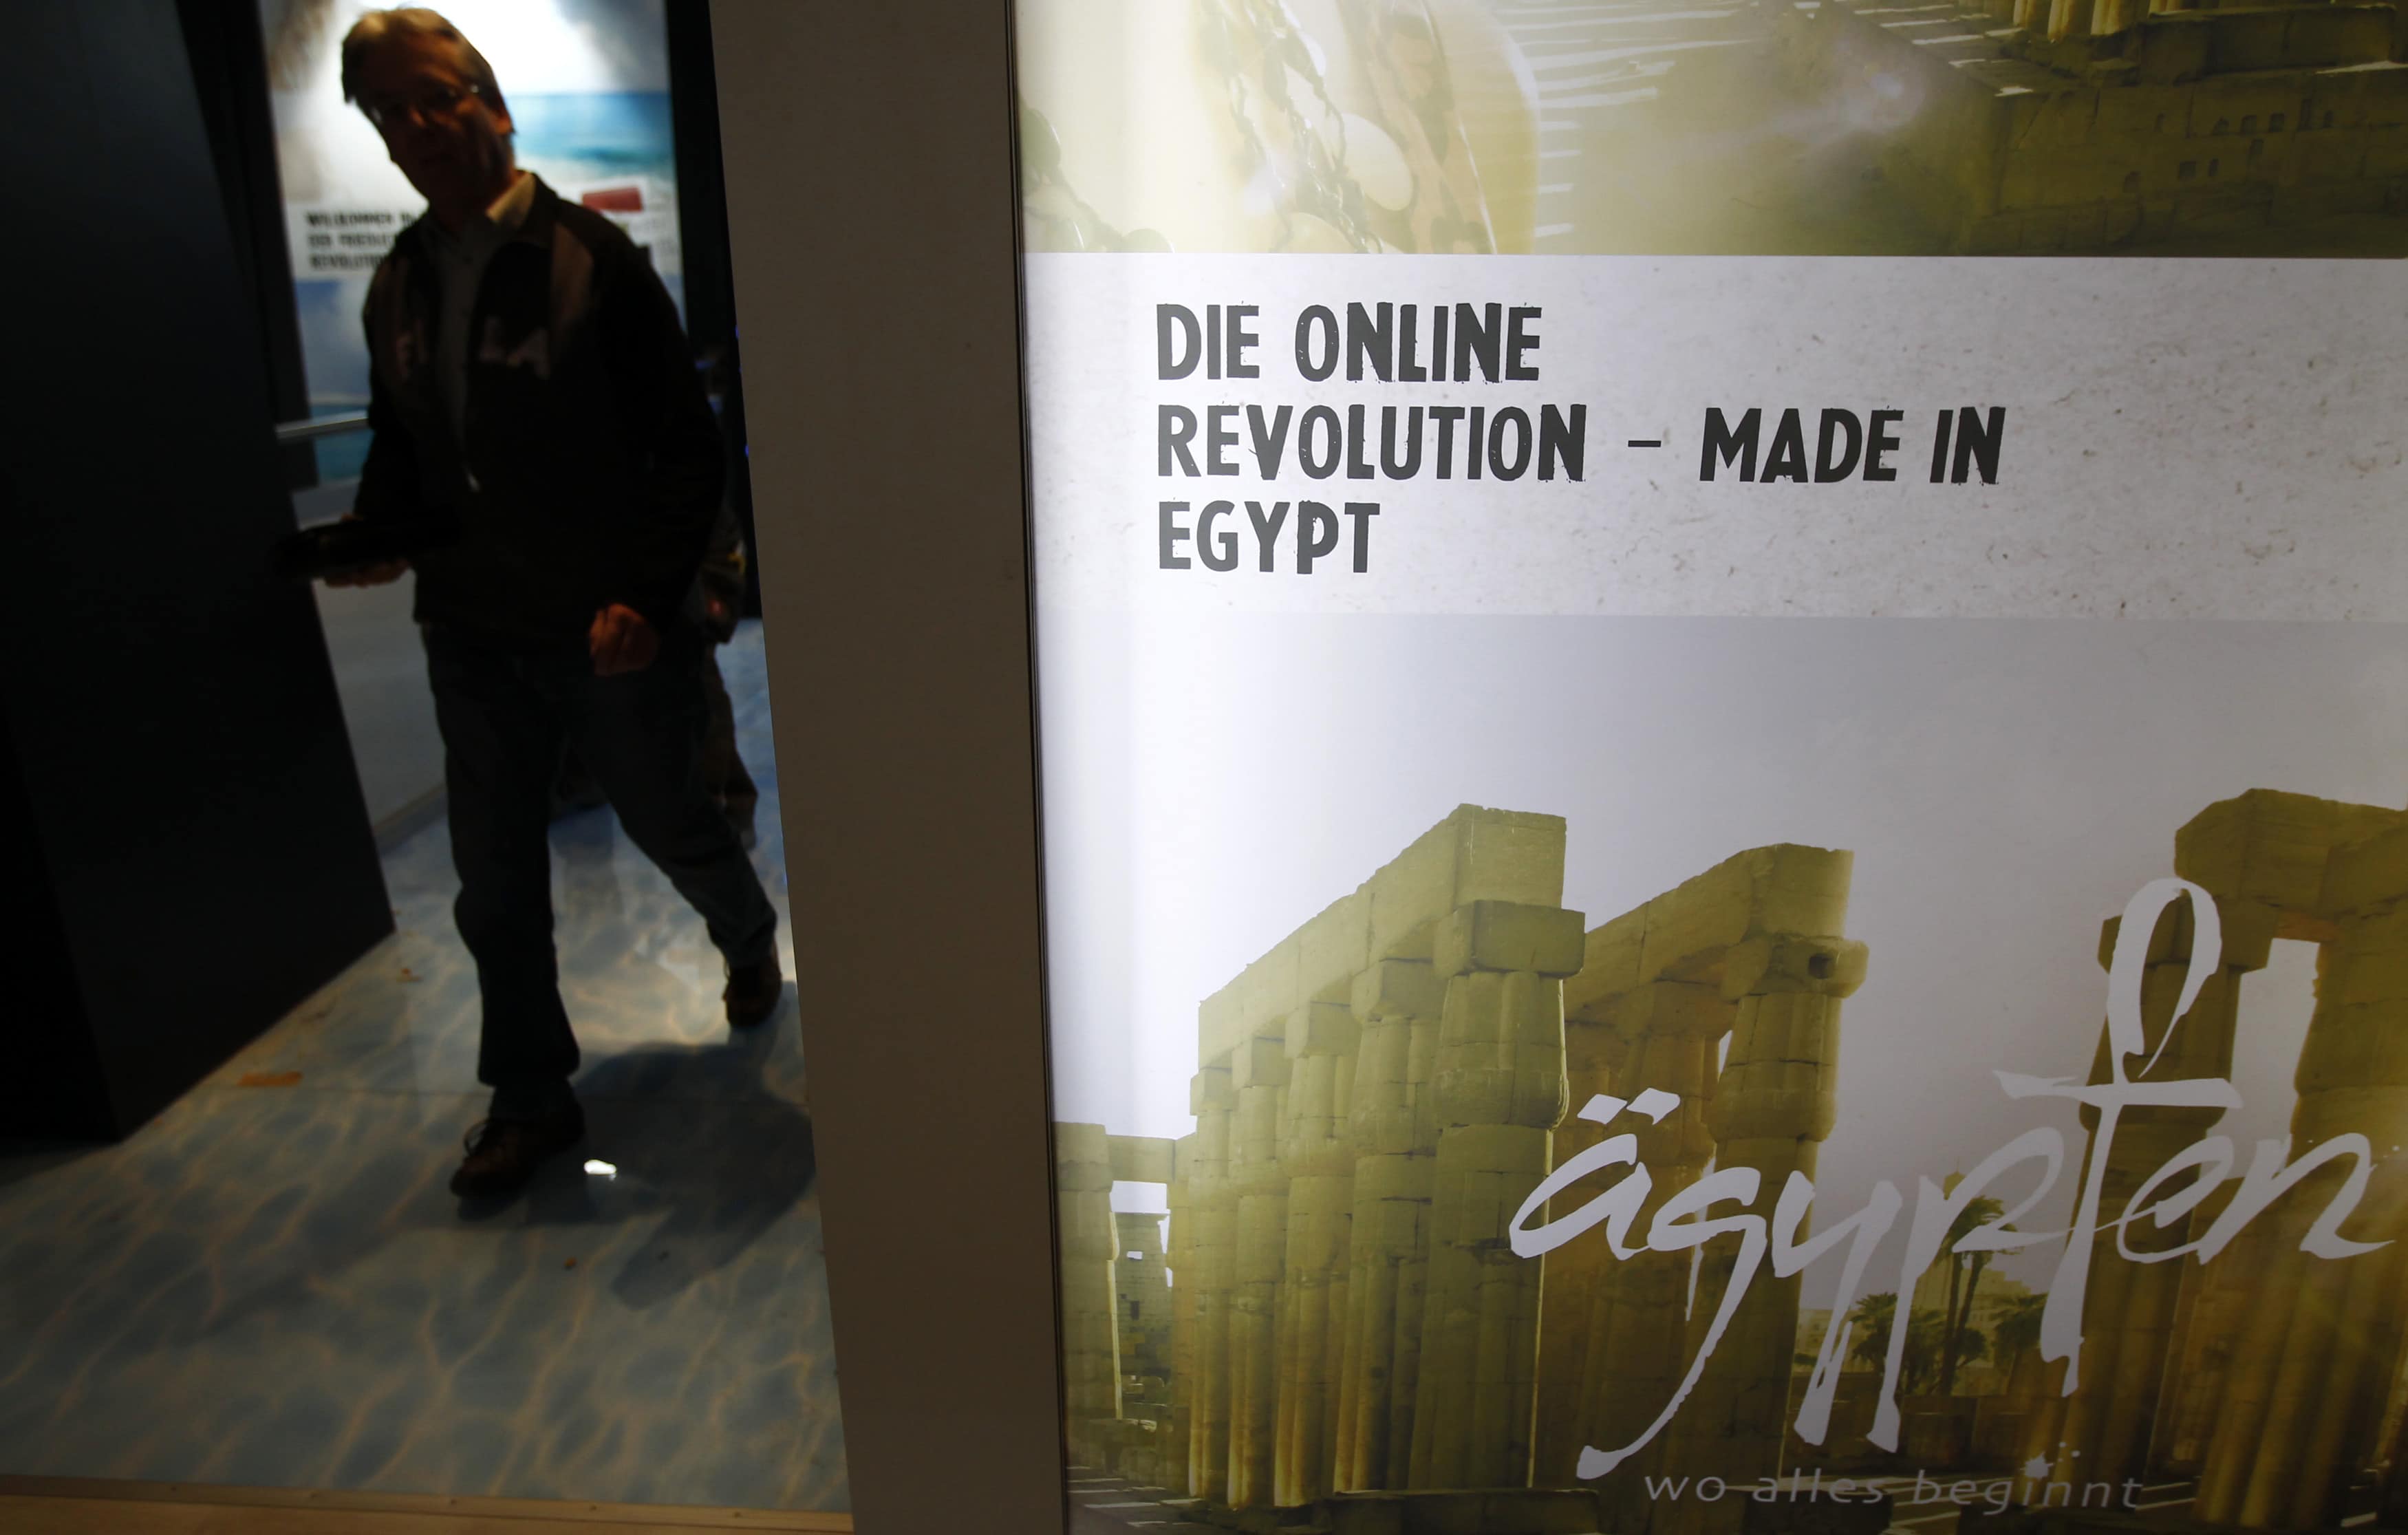 A worker walks next to a campaign poster referring to the political uprising in Egypt in Berlin in 2011. The banner reads, "The online revolution - Made in Egypt", REUTERS/Fabrizio Bensch